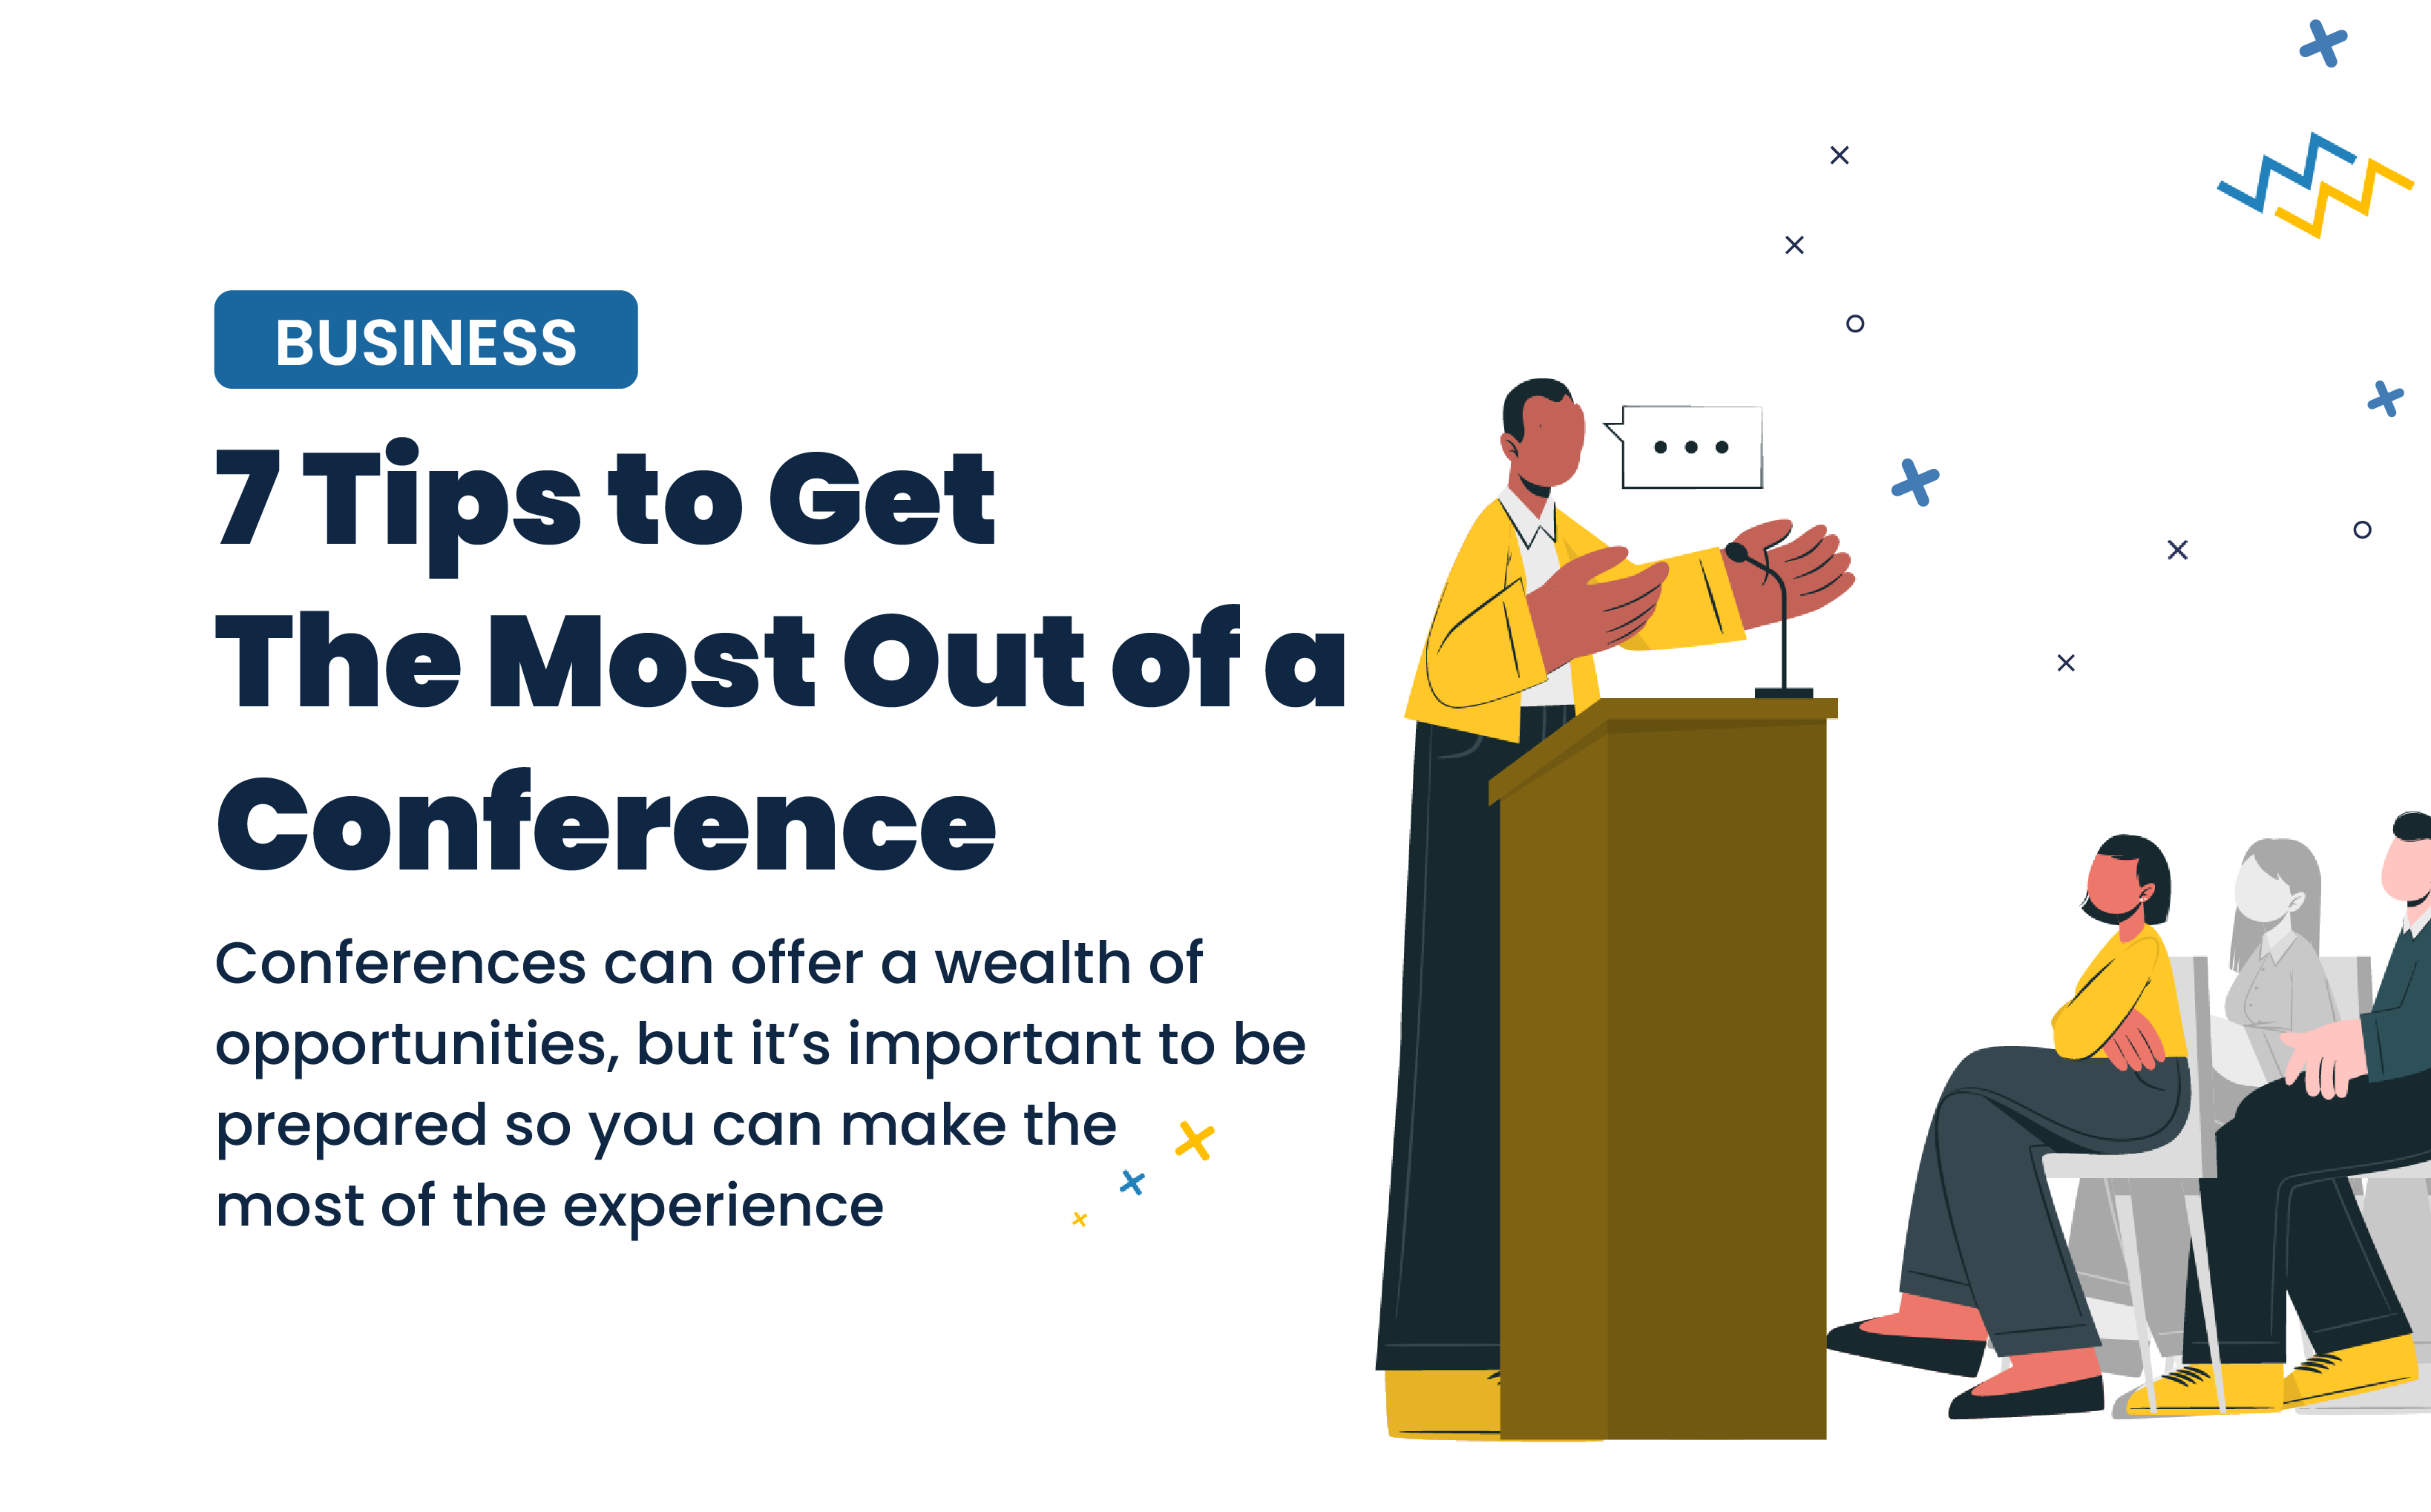 7 Tips to Get the Most Out of a Conference